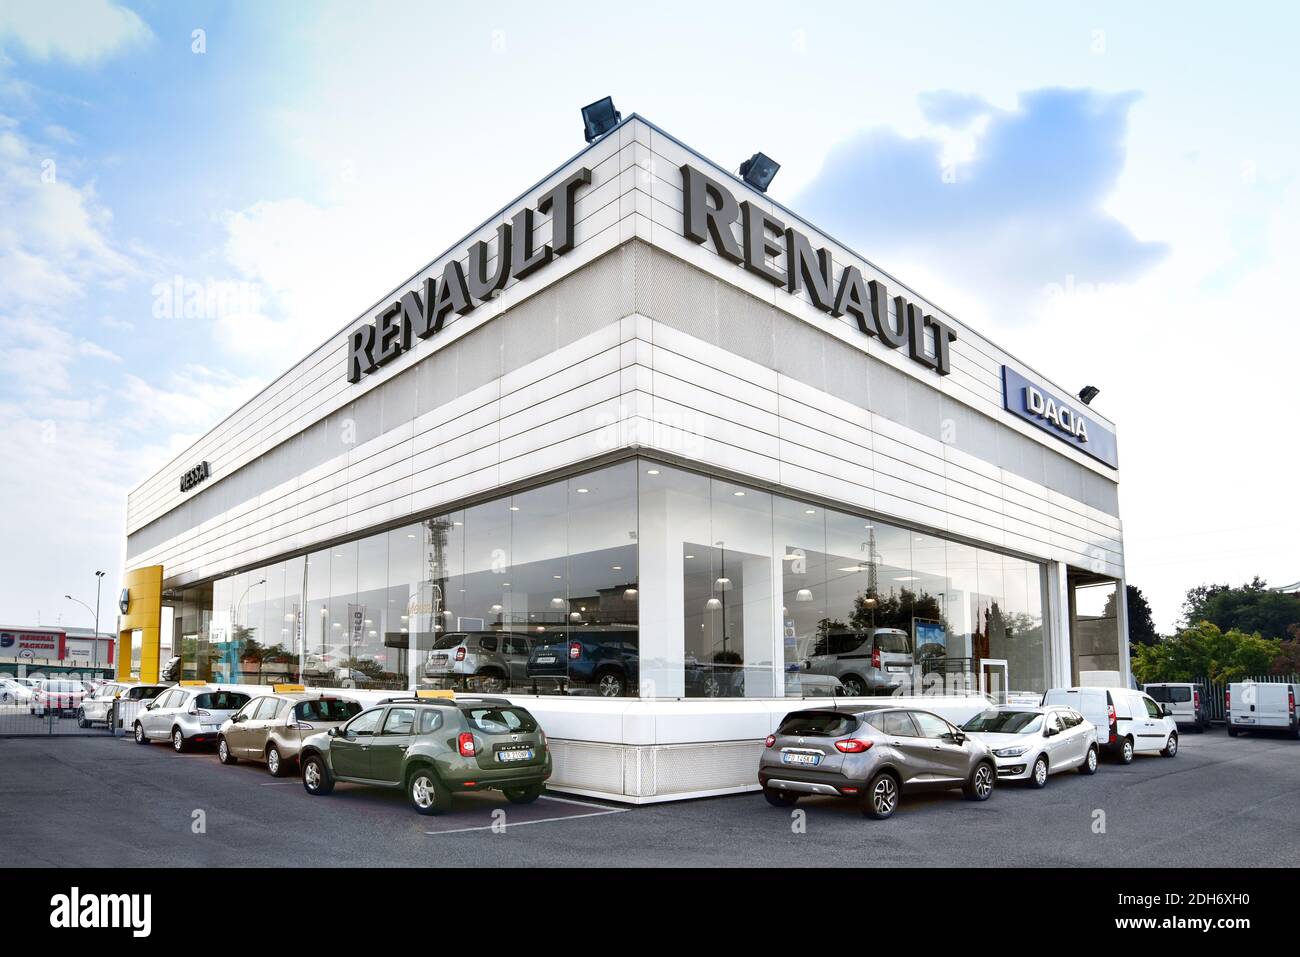 Corner of Renault and Dacia car dealer office building with several cars parked outside the showroom, viewed from low angle with wide angle camera Stock Photo